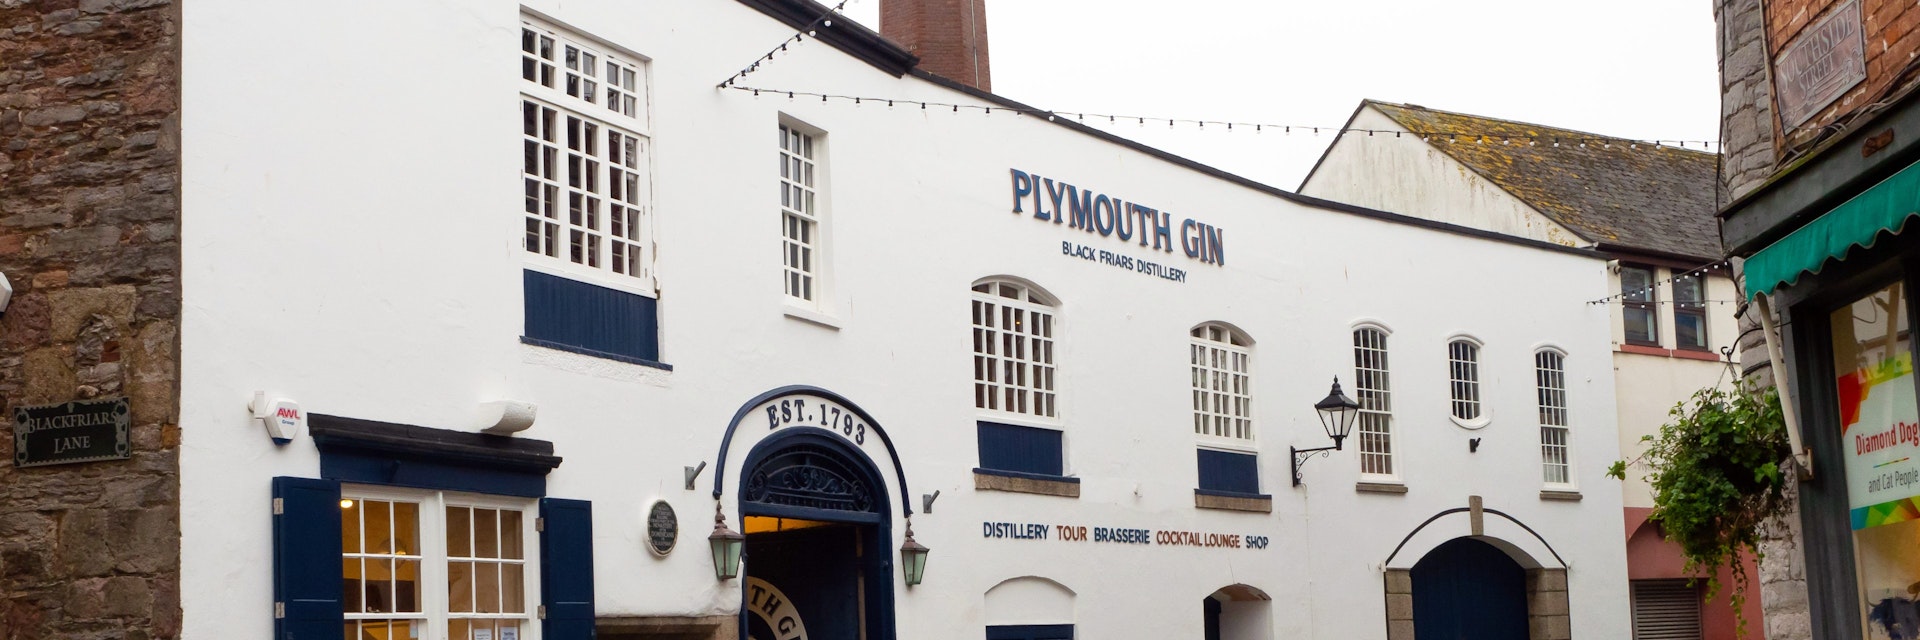 PLYMOUTH, DEVON, UK - January 25 2020: Plymouth Gin Black Friars distillery entrance on Southside Street

Plymouth Gin Distillery
